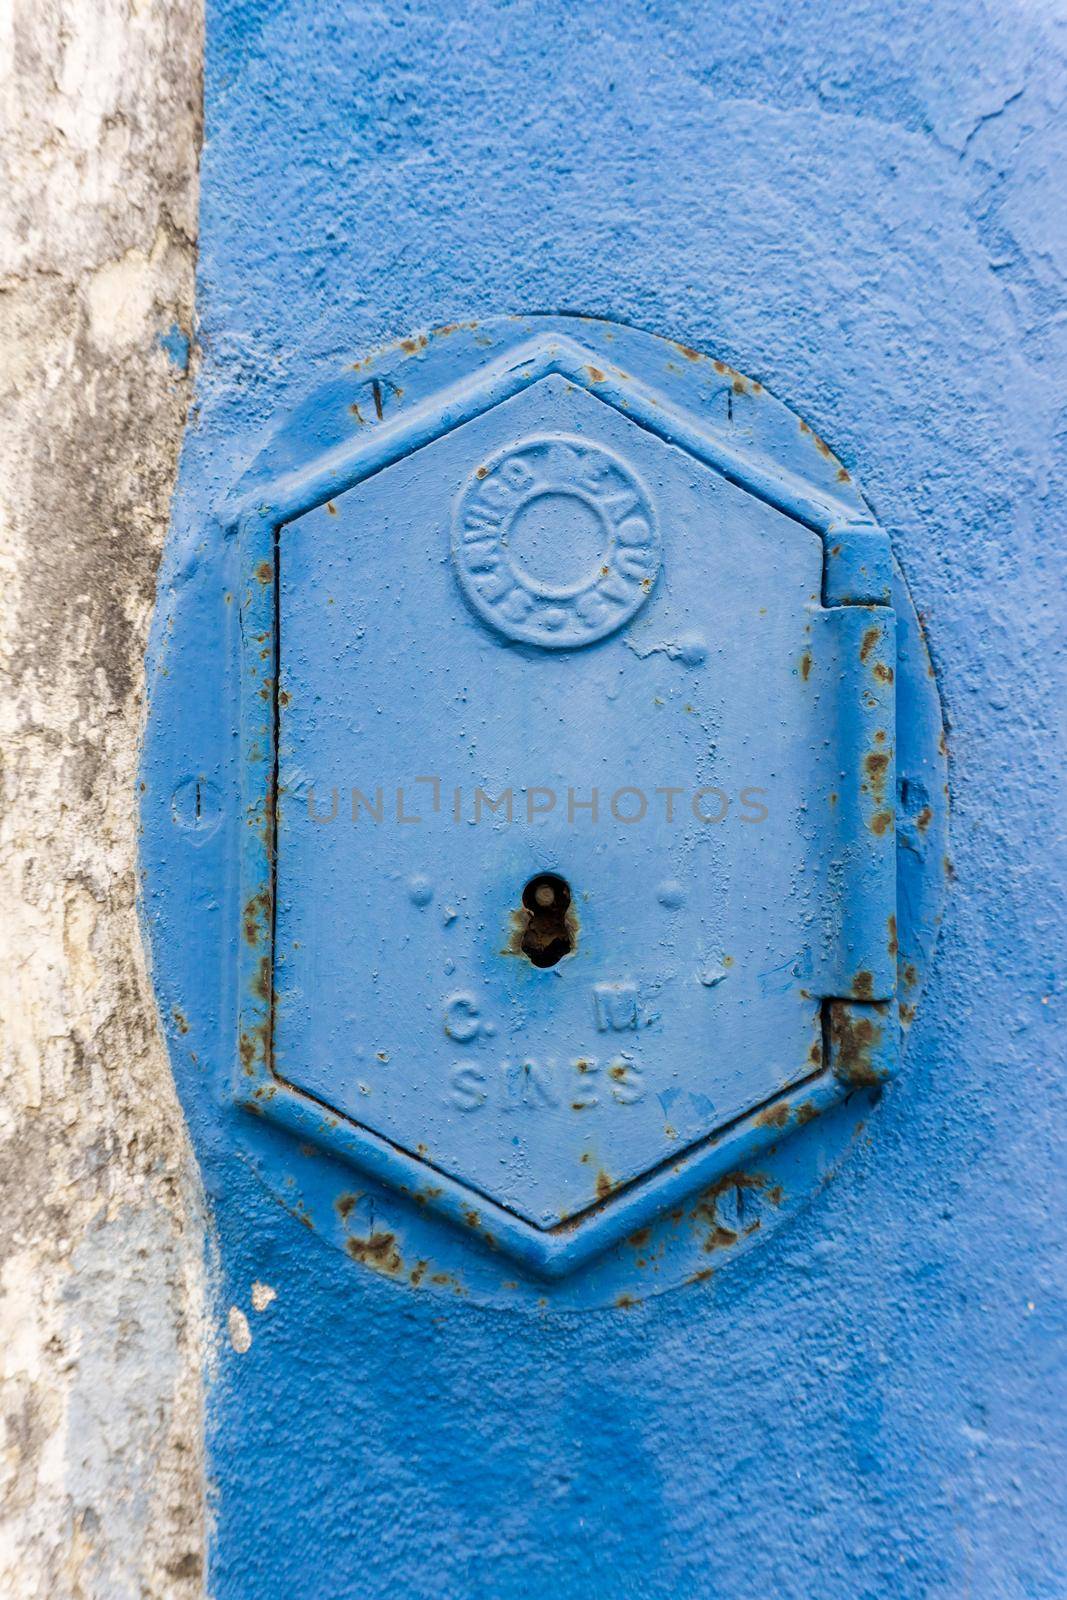 Old rusty blue painted iron lid of a valve box of the SERVICO DE AGUA PUBLIC WATER SUPPLY on the chipped white - blue painted wall of a house in the Old Town area, Portugal